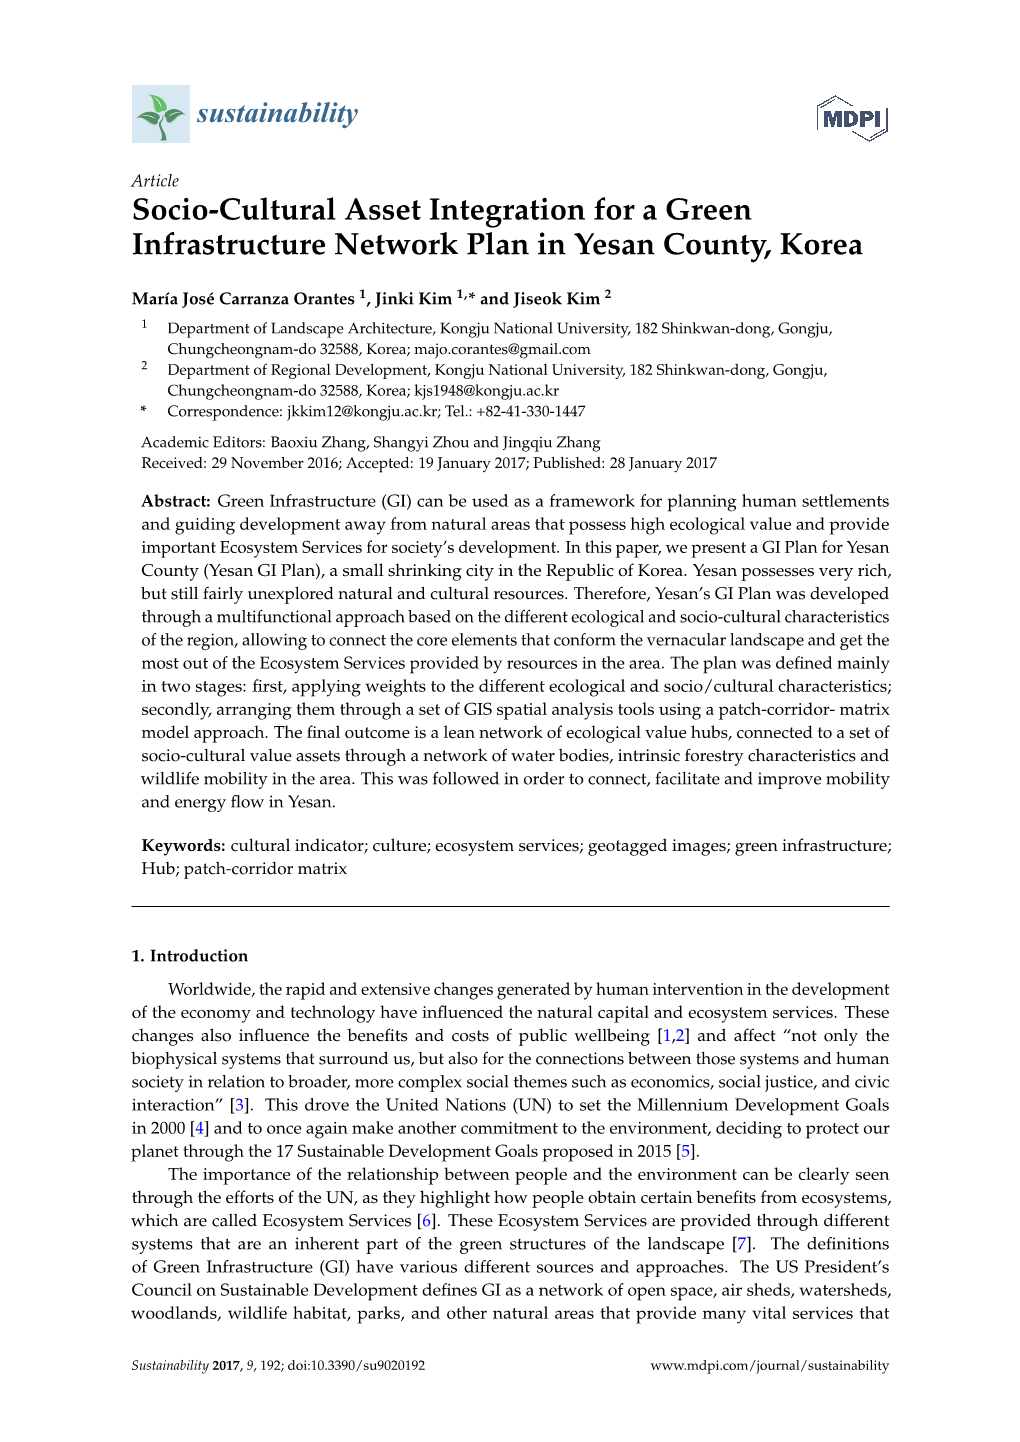 Socio-Cultural Asset Integration for a Green Infrastructure Network Plan in Yesan County, Korea